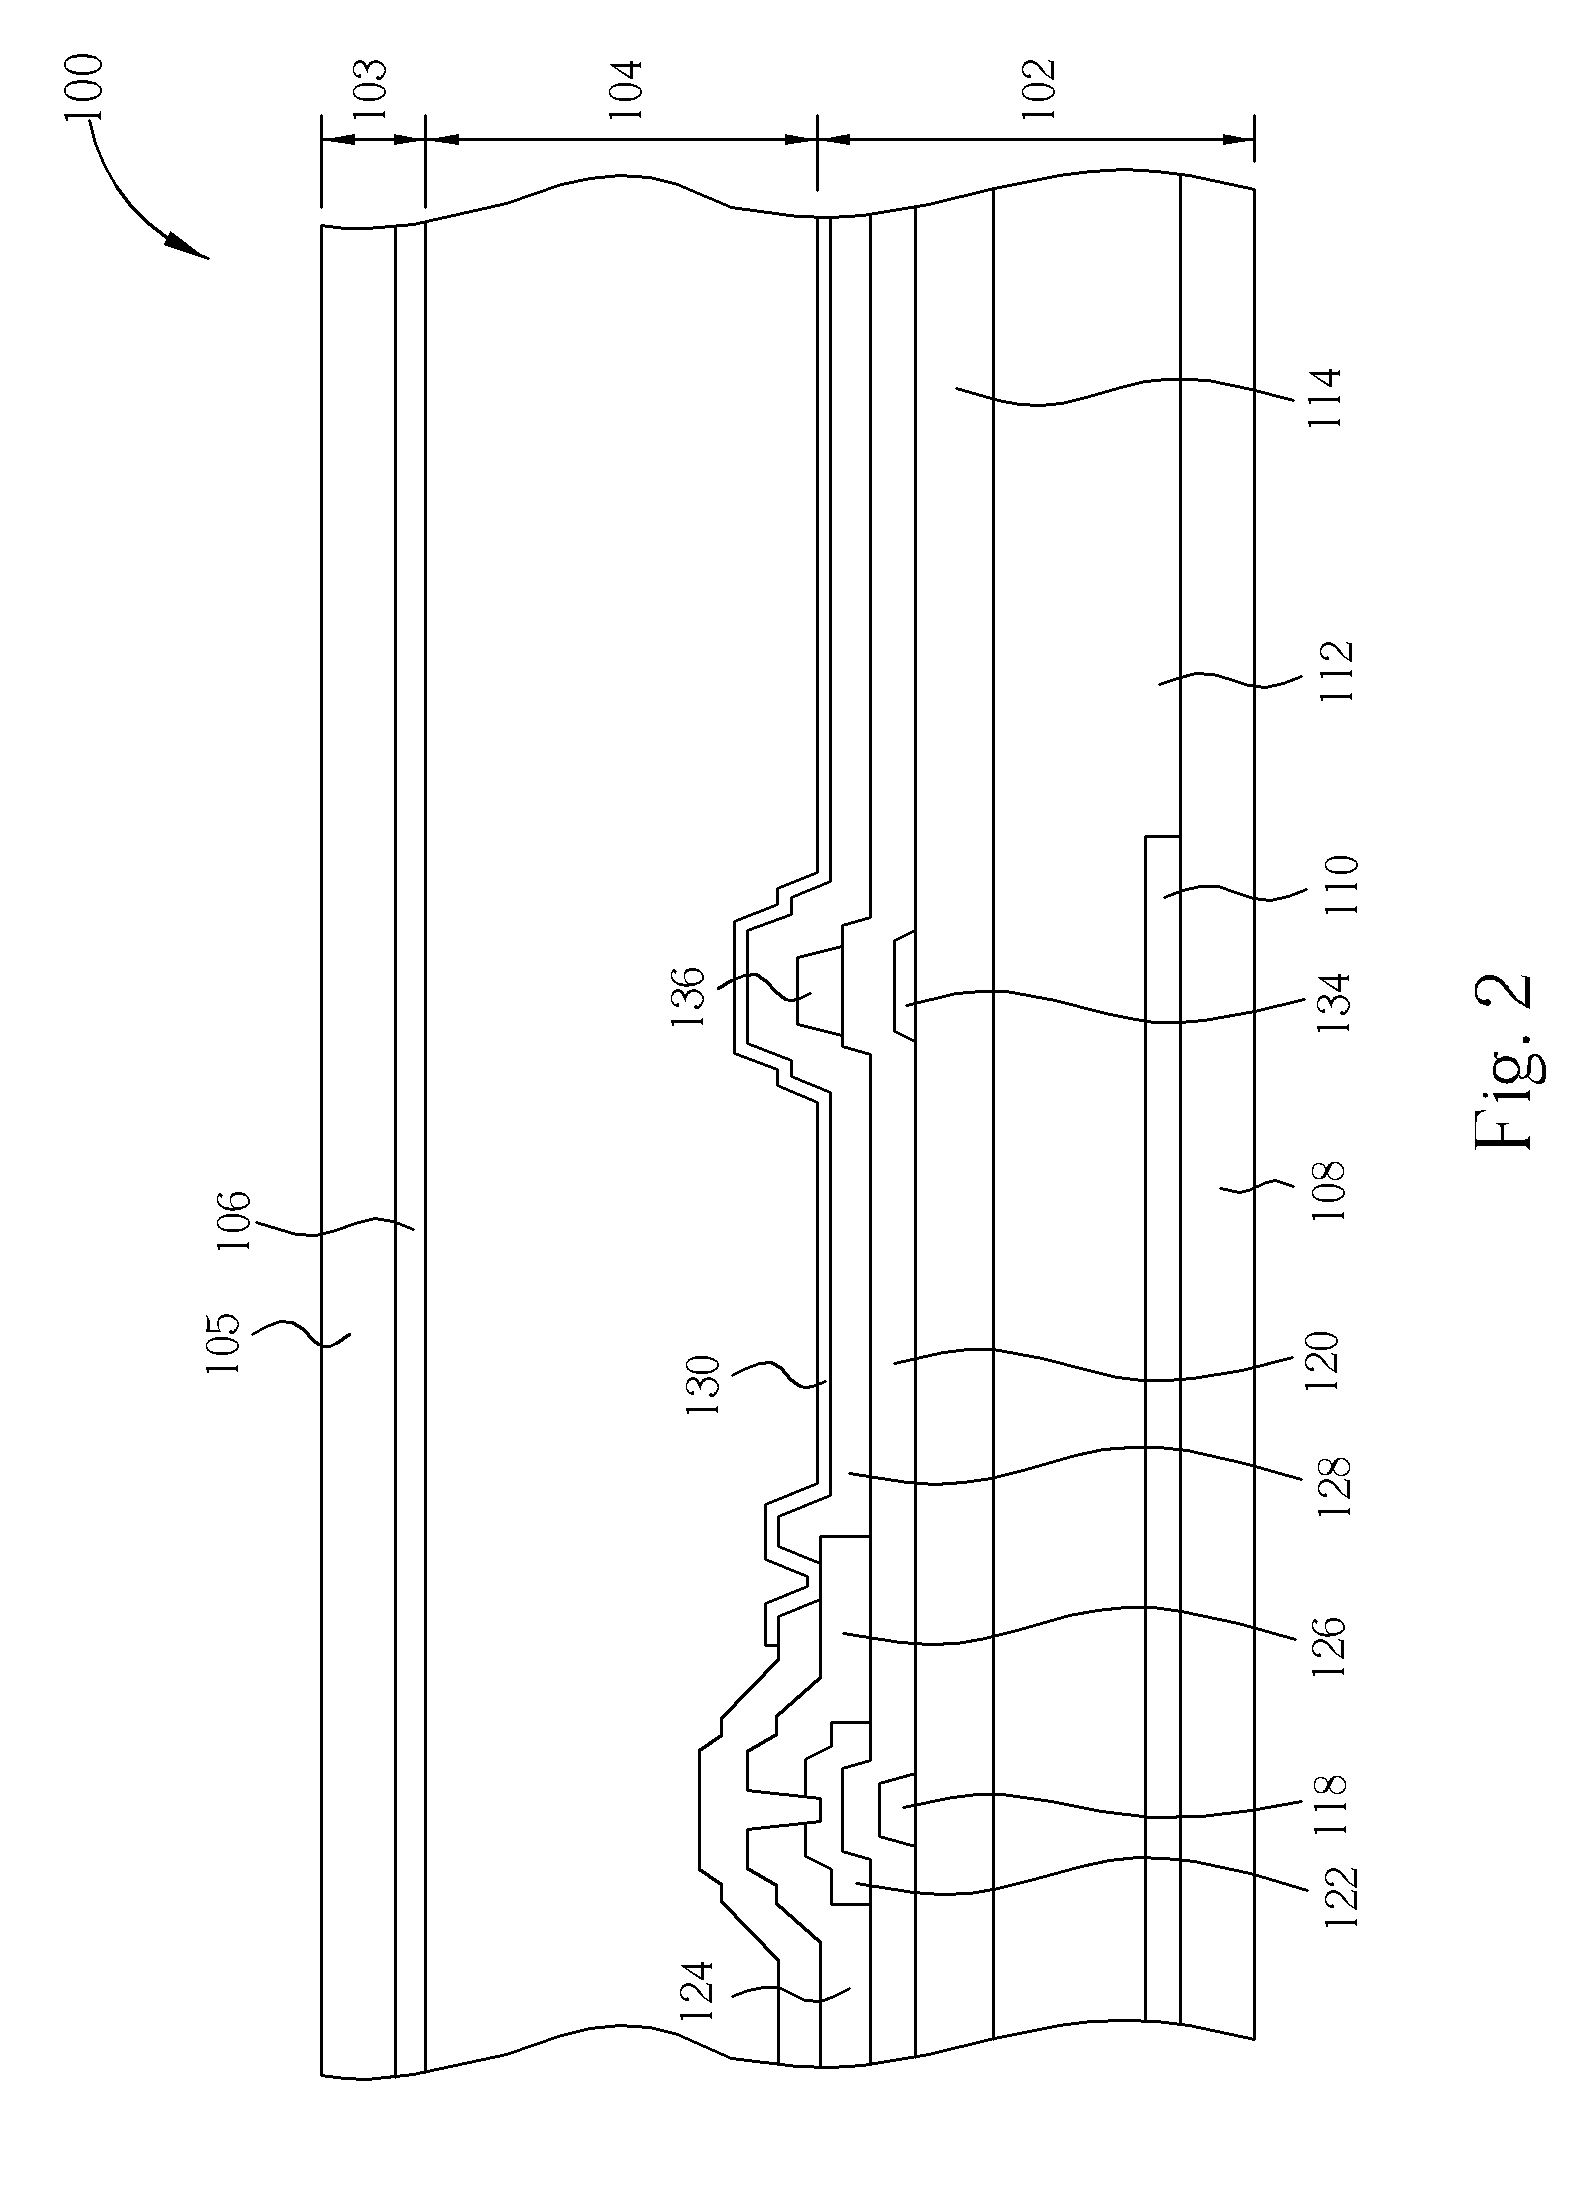 Transflective liquid crystal display panel with integrated switch element and color filter layer on a substrate